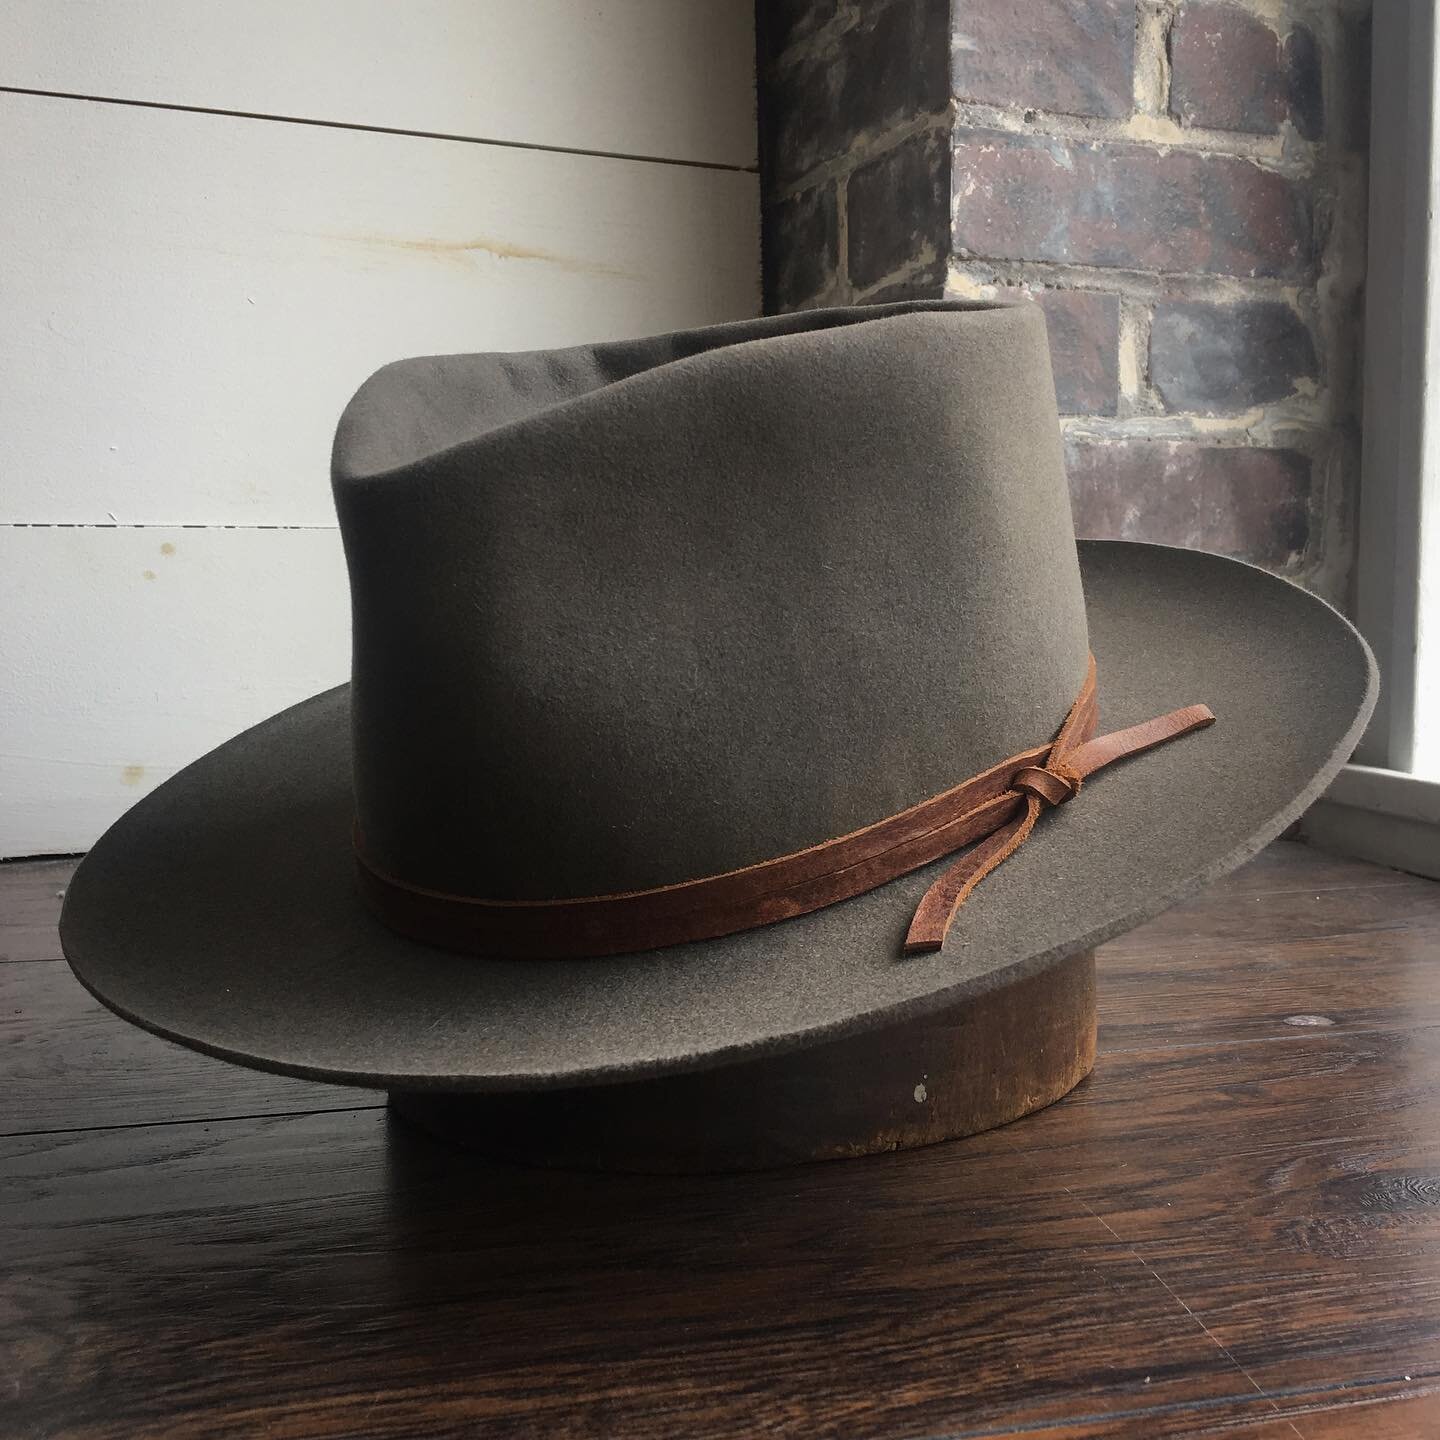  Granite, dress weight, pure beaver.  Medium-low teardrp crown.  2 3/4” flanged brim.  Brown leather outer. 